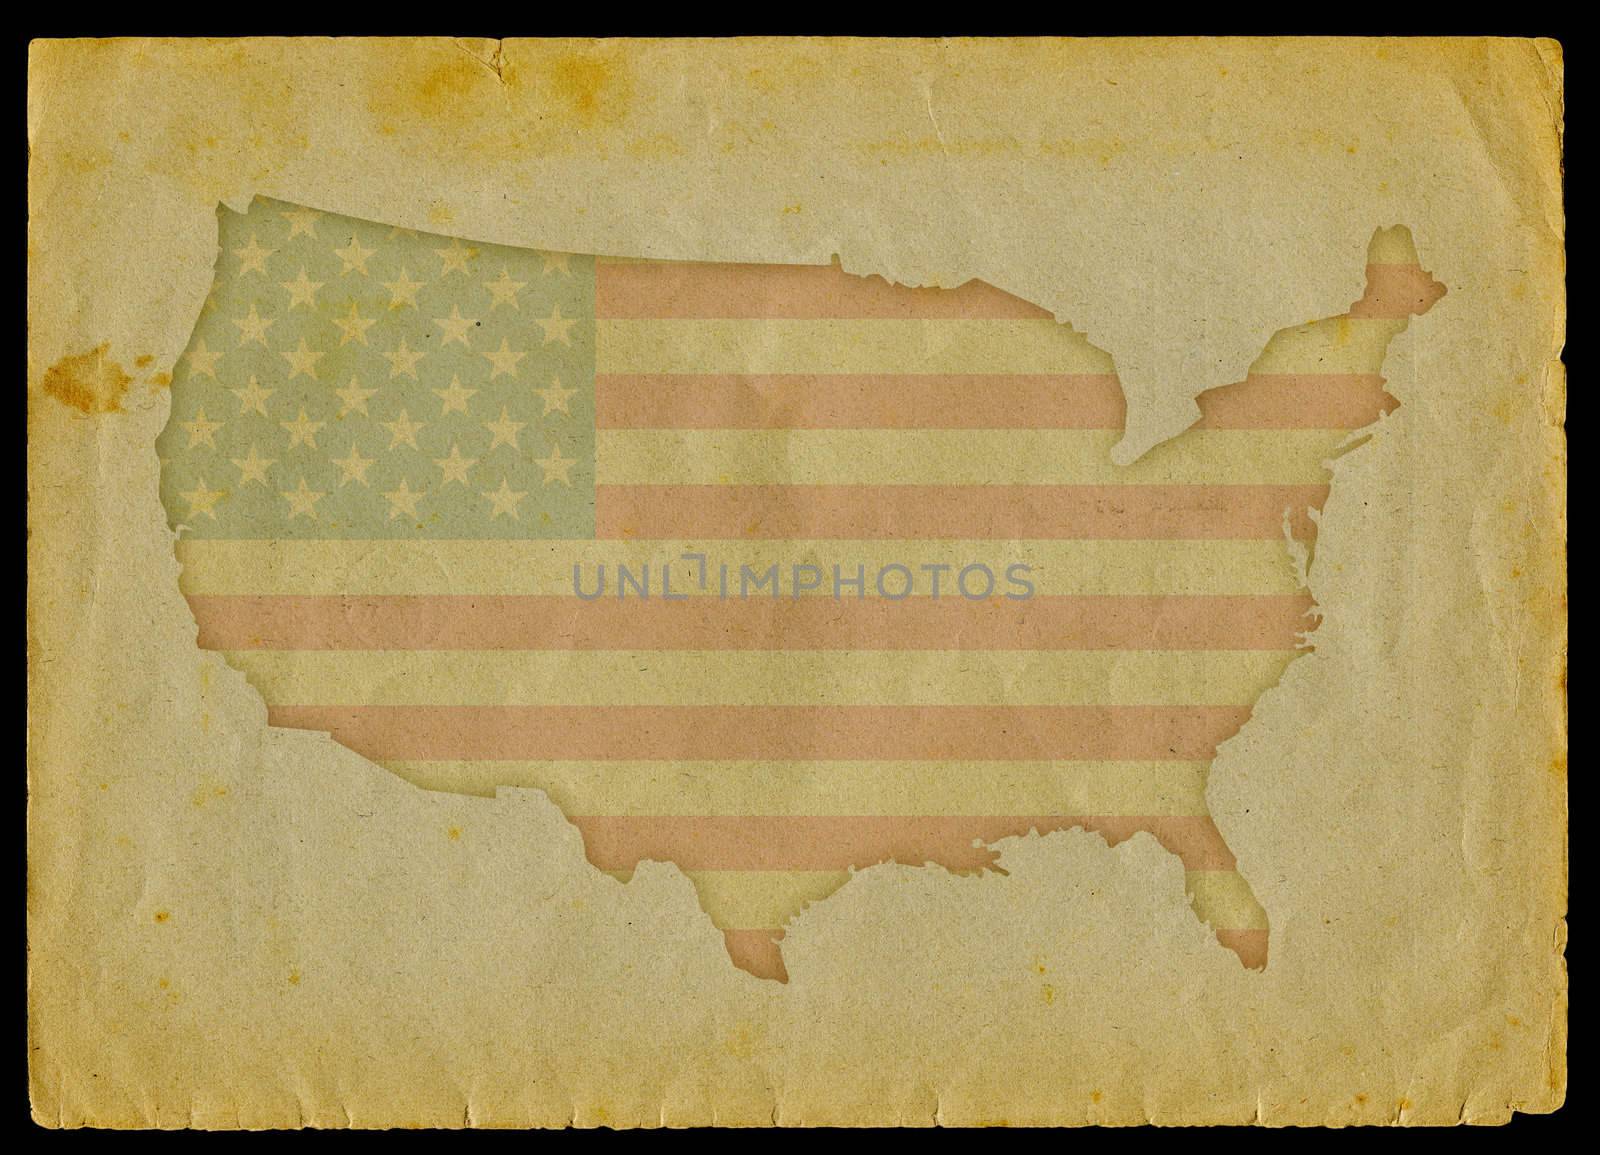 USA map with flag inside engraved on a old paper page.
Clipping path of the map is included.